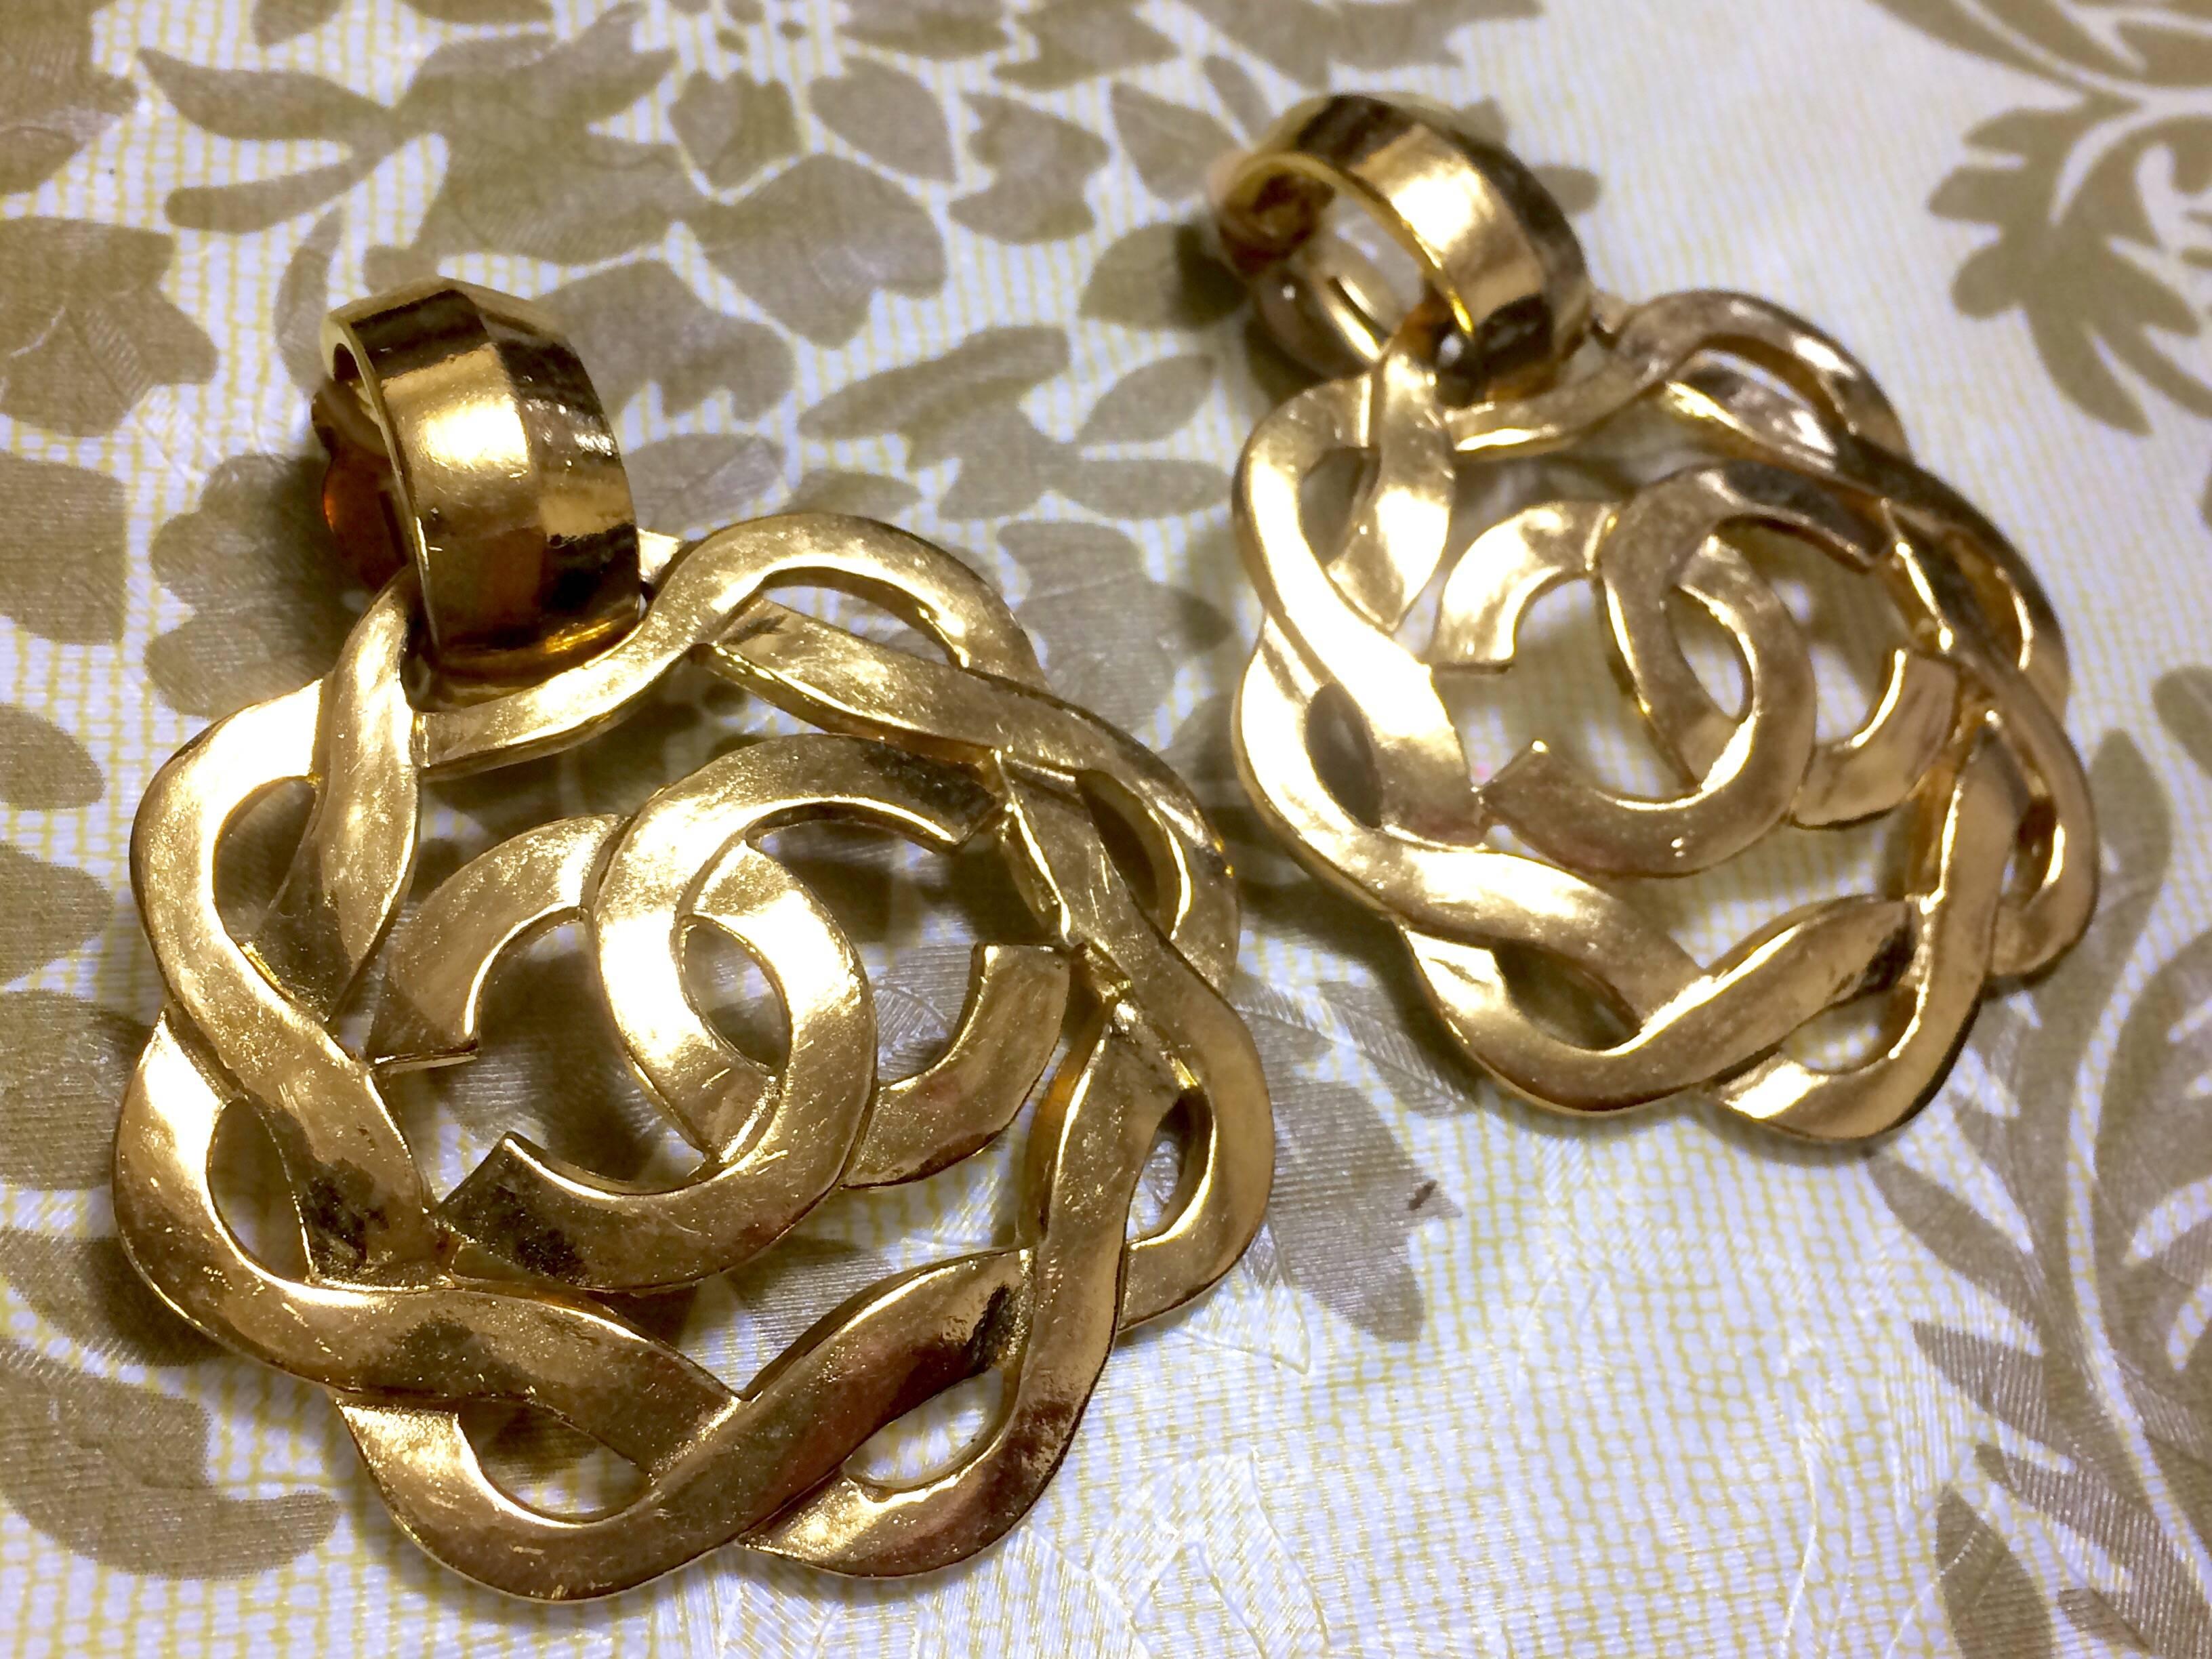 1990s. Vintage CHANEL extra large wavy round flower dangling earrings with CC mark motif. Rare jewelry from Chanel.

Introducing another FAB and gorgeous vintage jewelry from CHANEL back in the 90's.
Extra large wavy round shape that looks also like